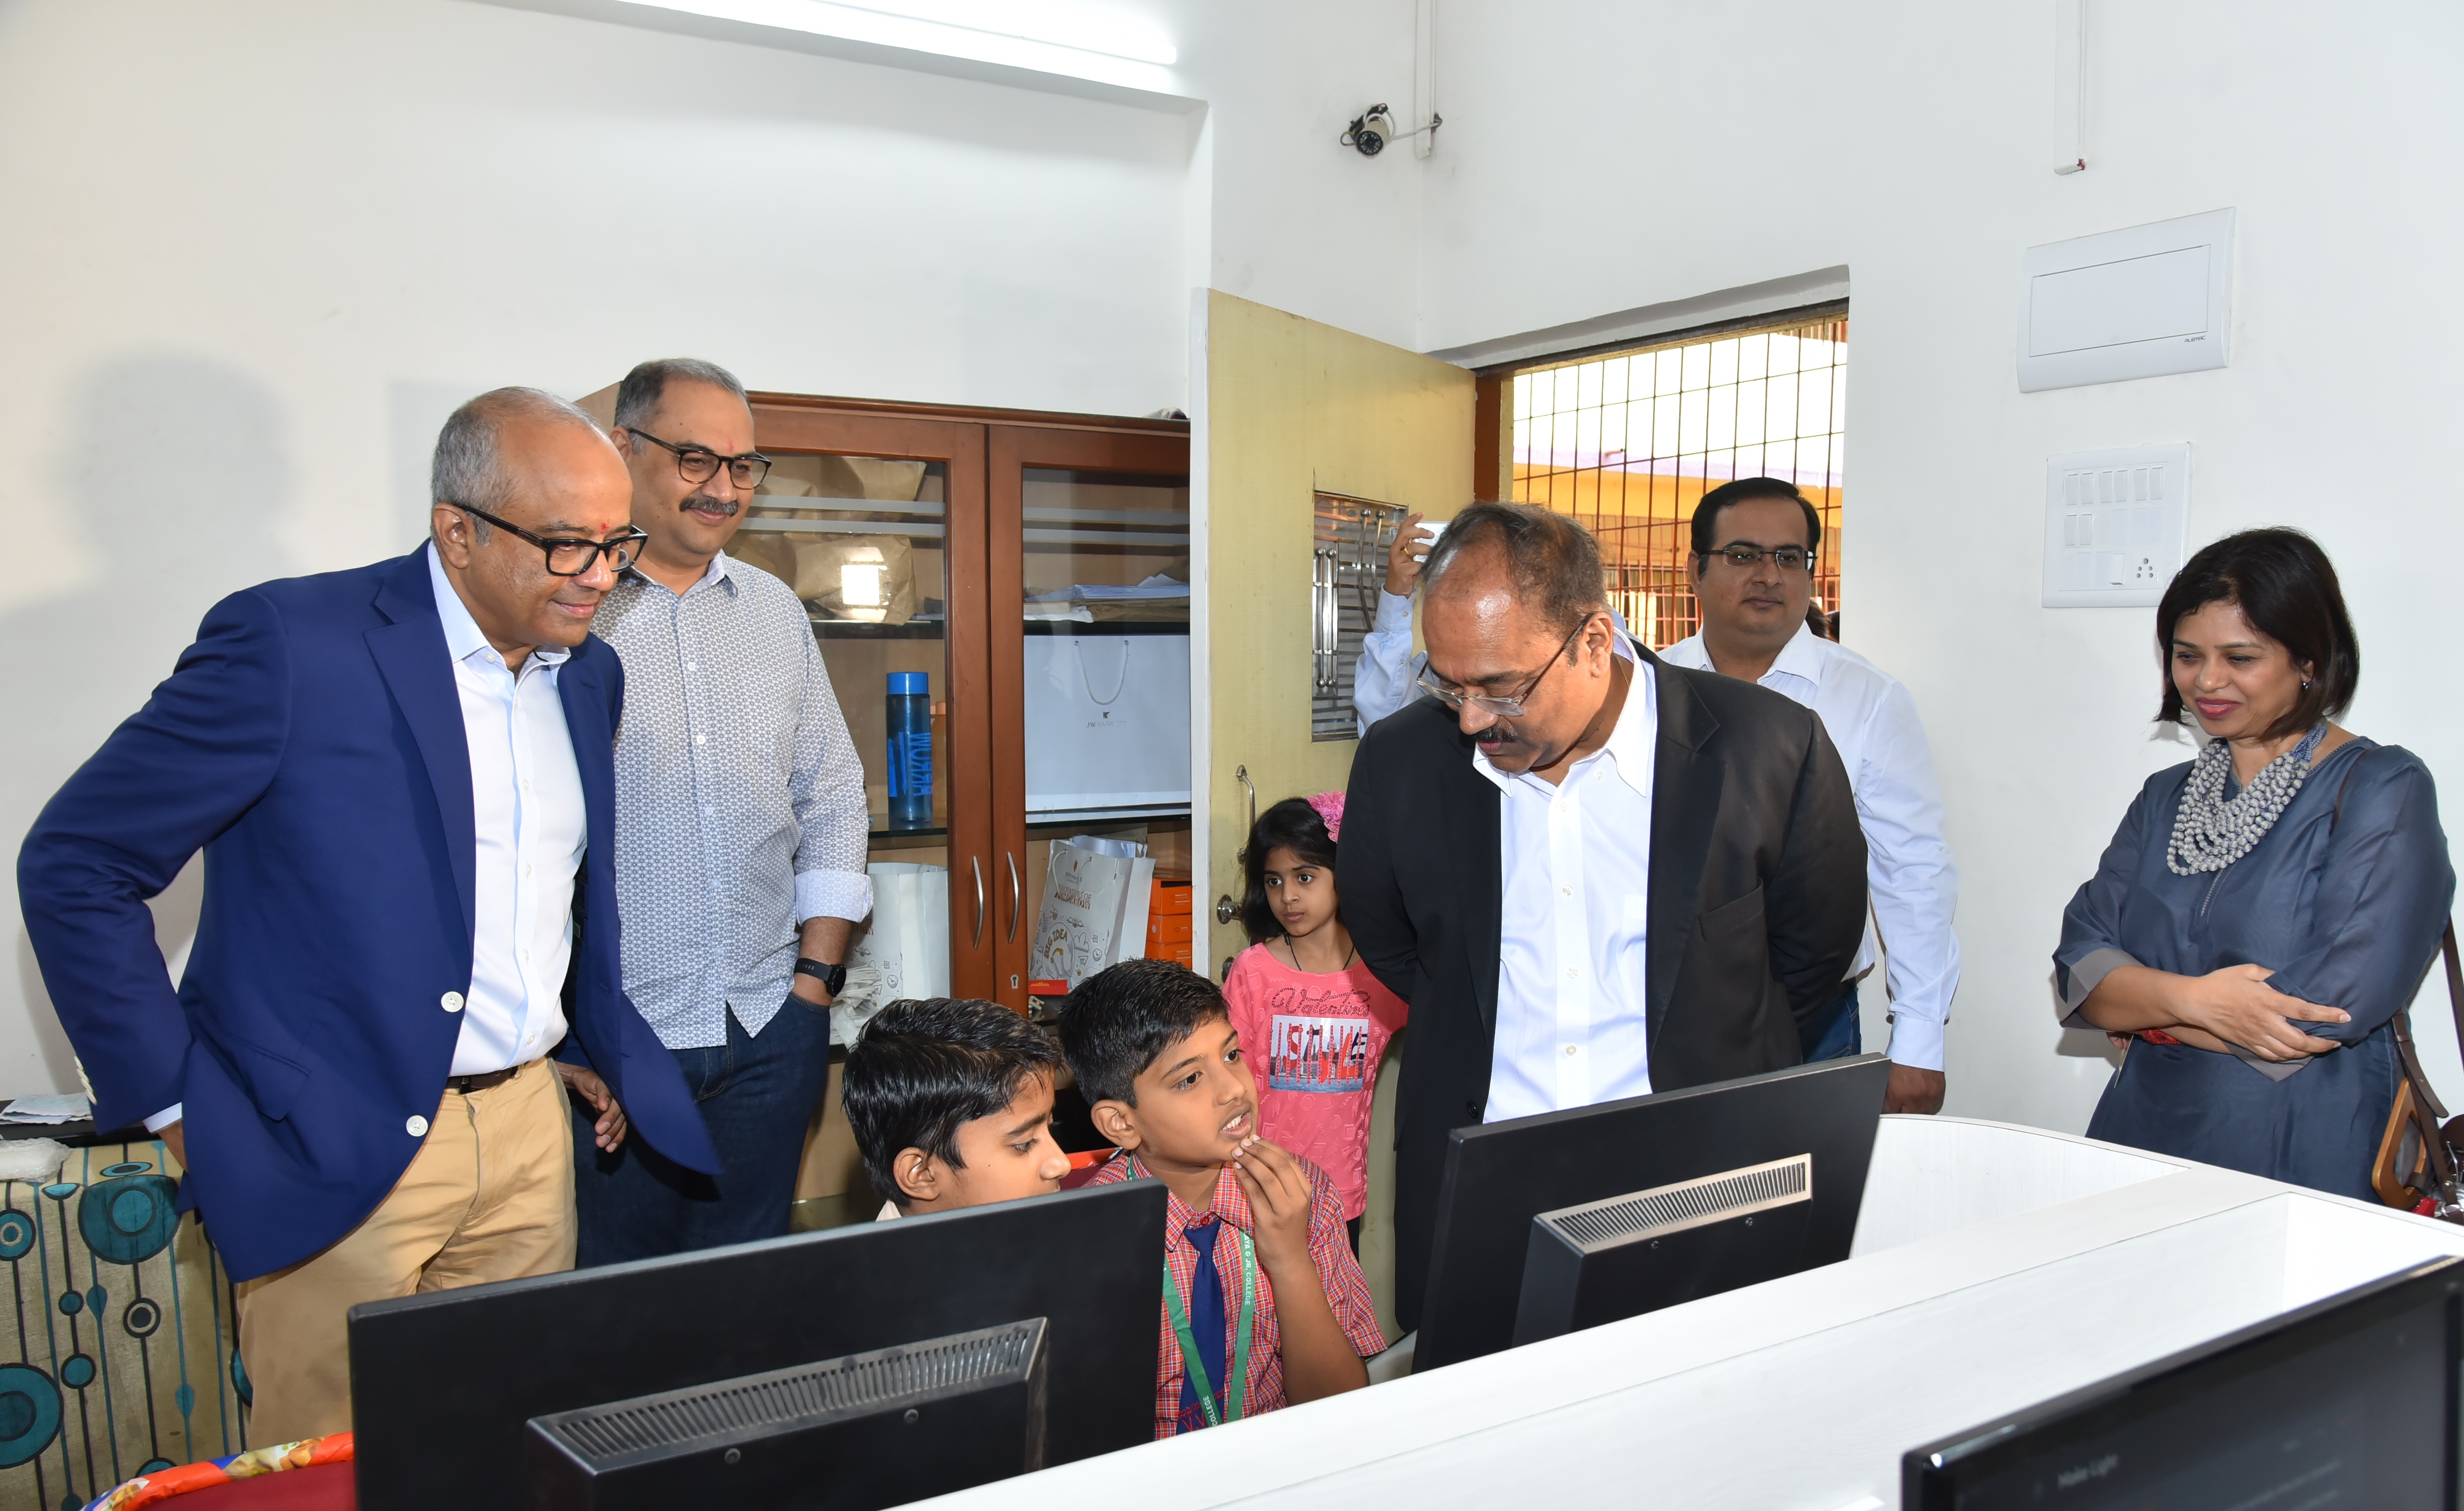 WPP Foundation Inaugurates Its First Community Tinkering Lab In Mumbai With Ramanathan Ramanan, Mission Director - Atal Innovation Mission